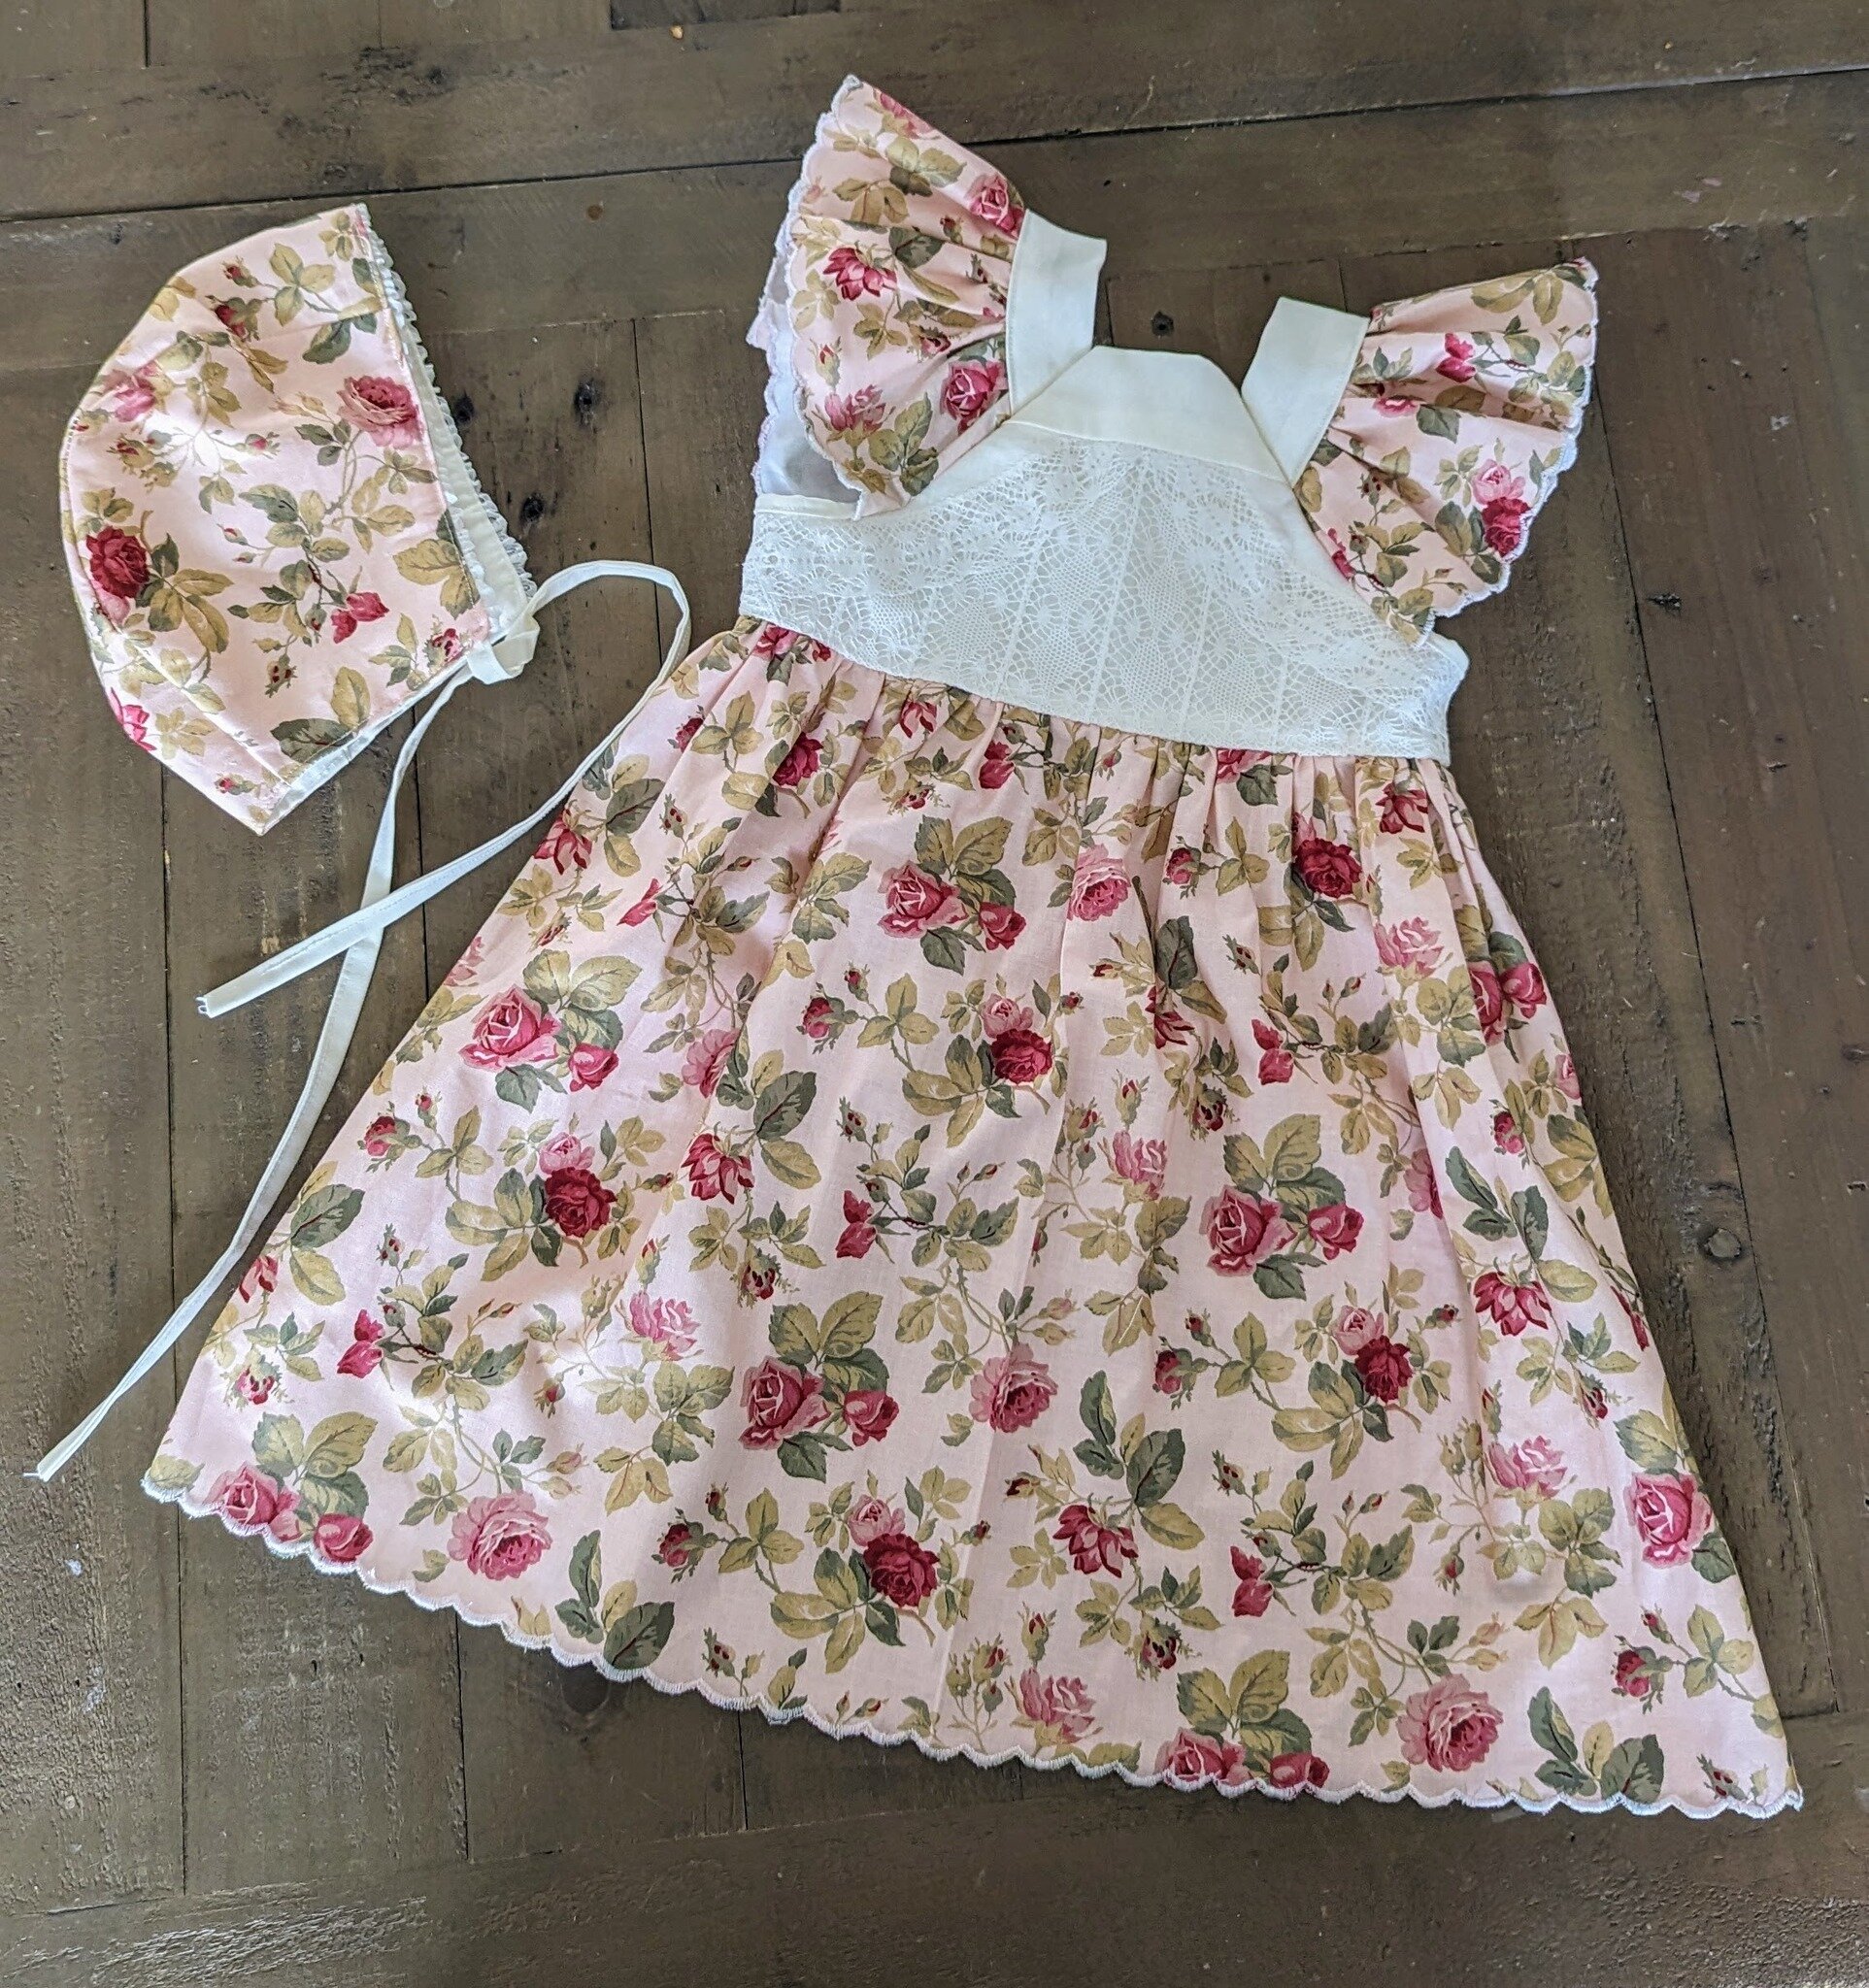 ✨Heirloom Children's Clothing Launch ✨

I am now making handmade heirloom clothing perfect for your loved little ones. 

The first product I'd like to introduce you to is the English Rose dress and matching bonnet. It is made from 100% vintage cotton